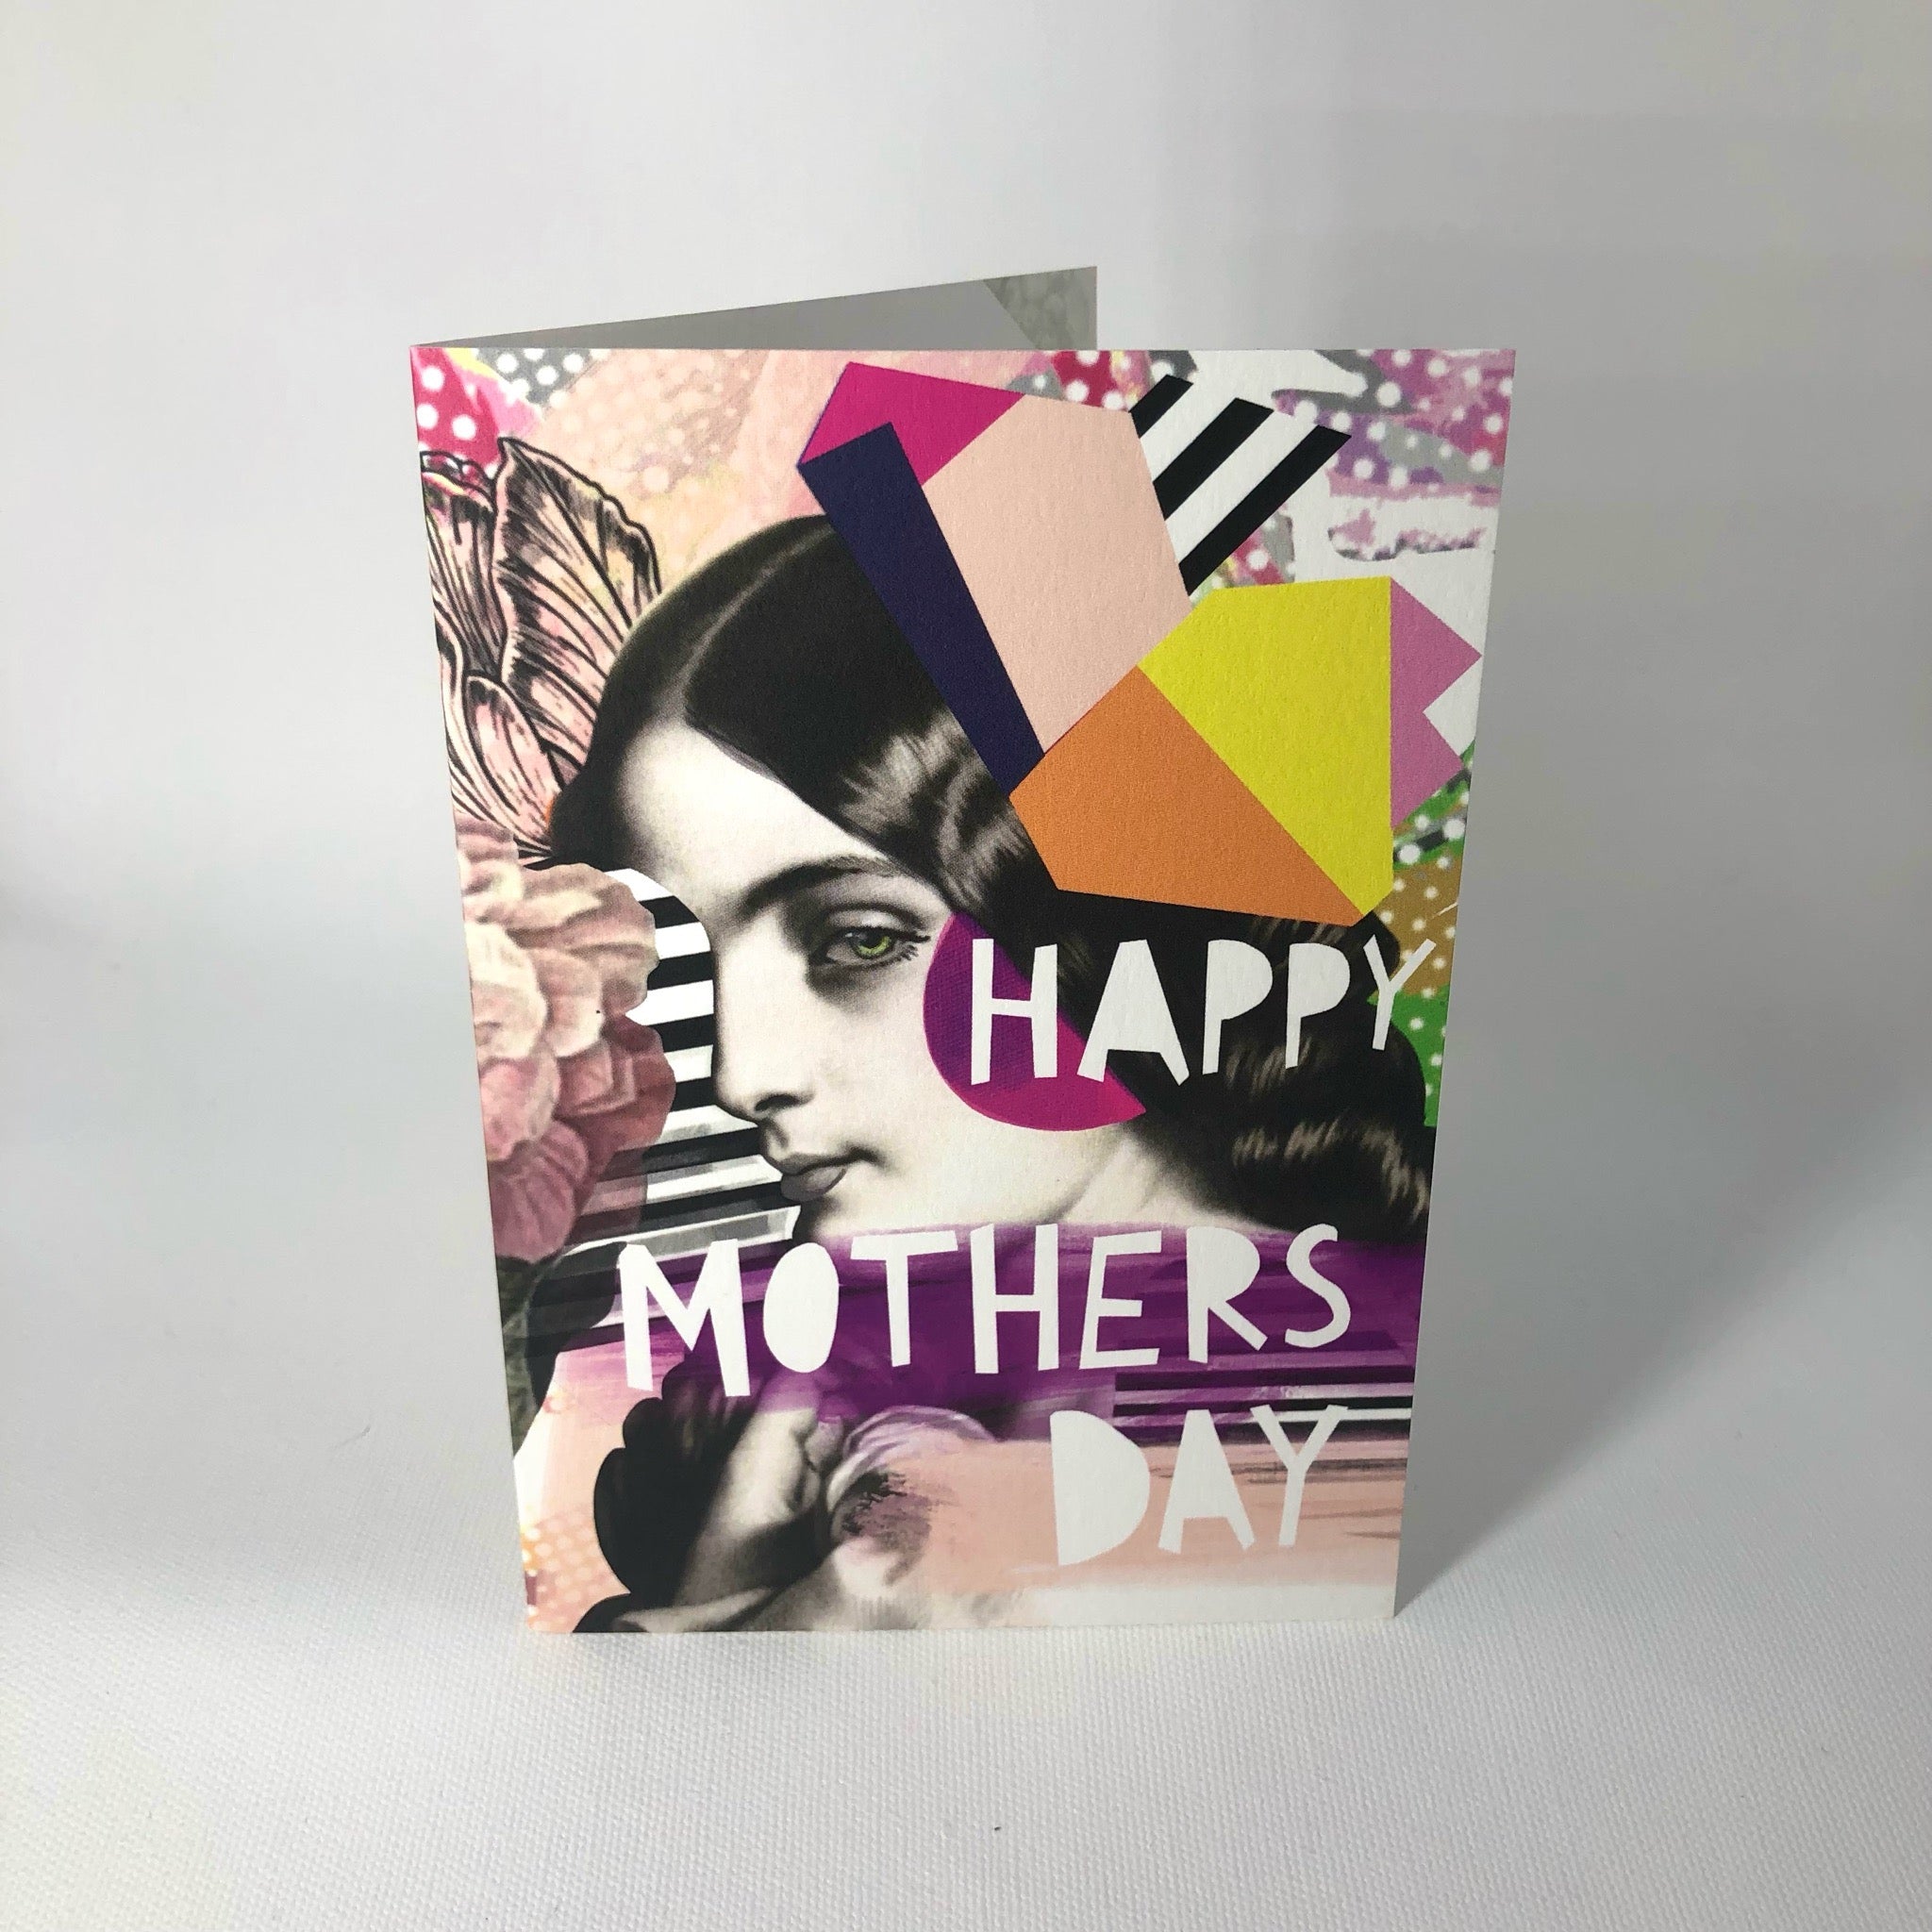 Motley Blooms - Mothers Day Greeting Card